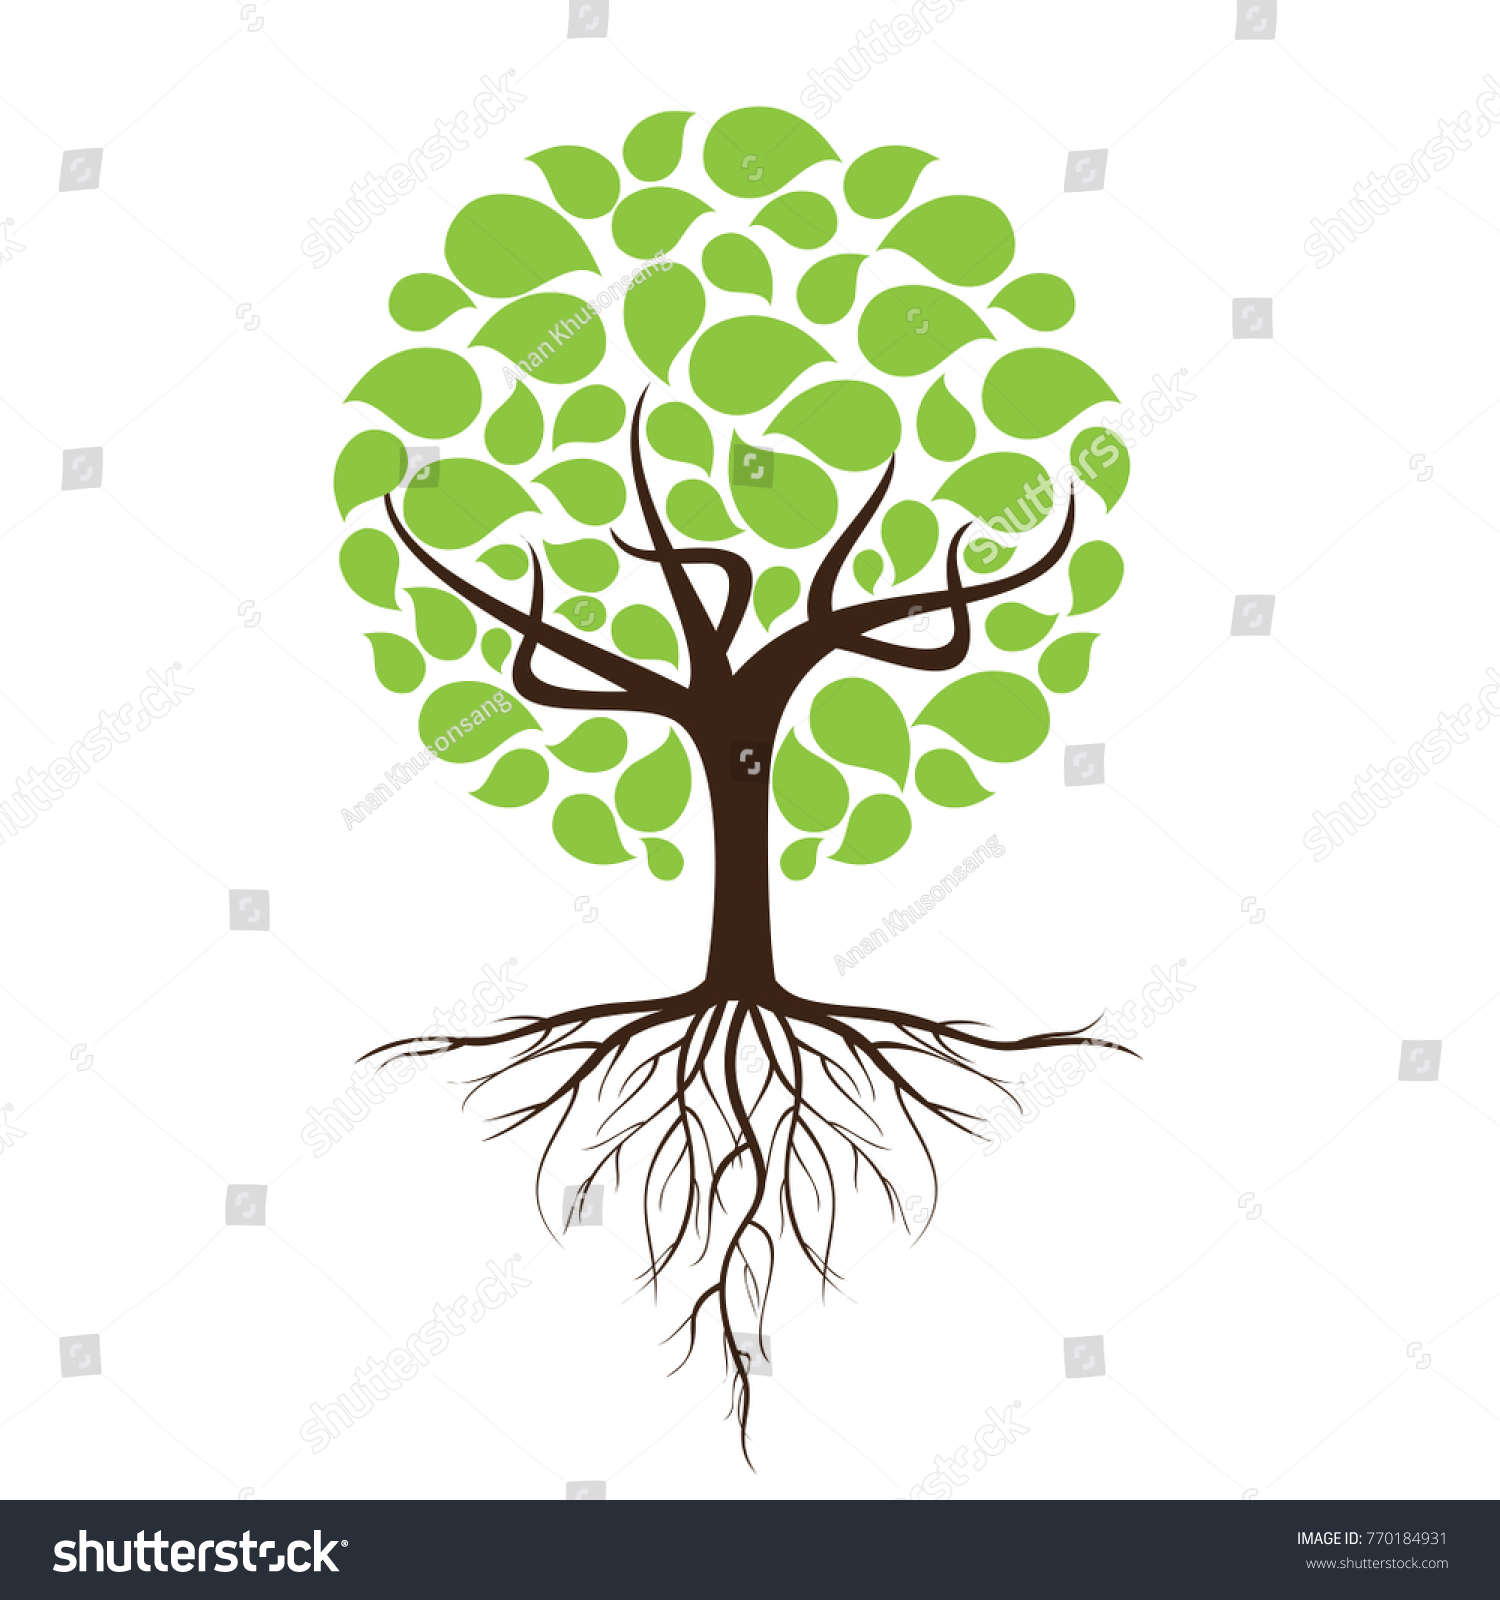 SVG of Green leaf tree with roots With trees isolated from white background. svg